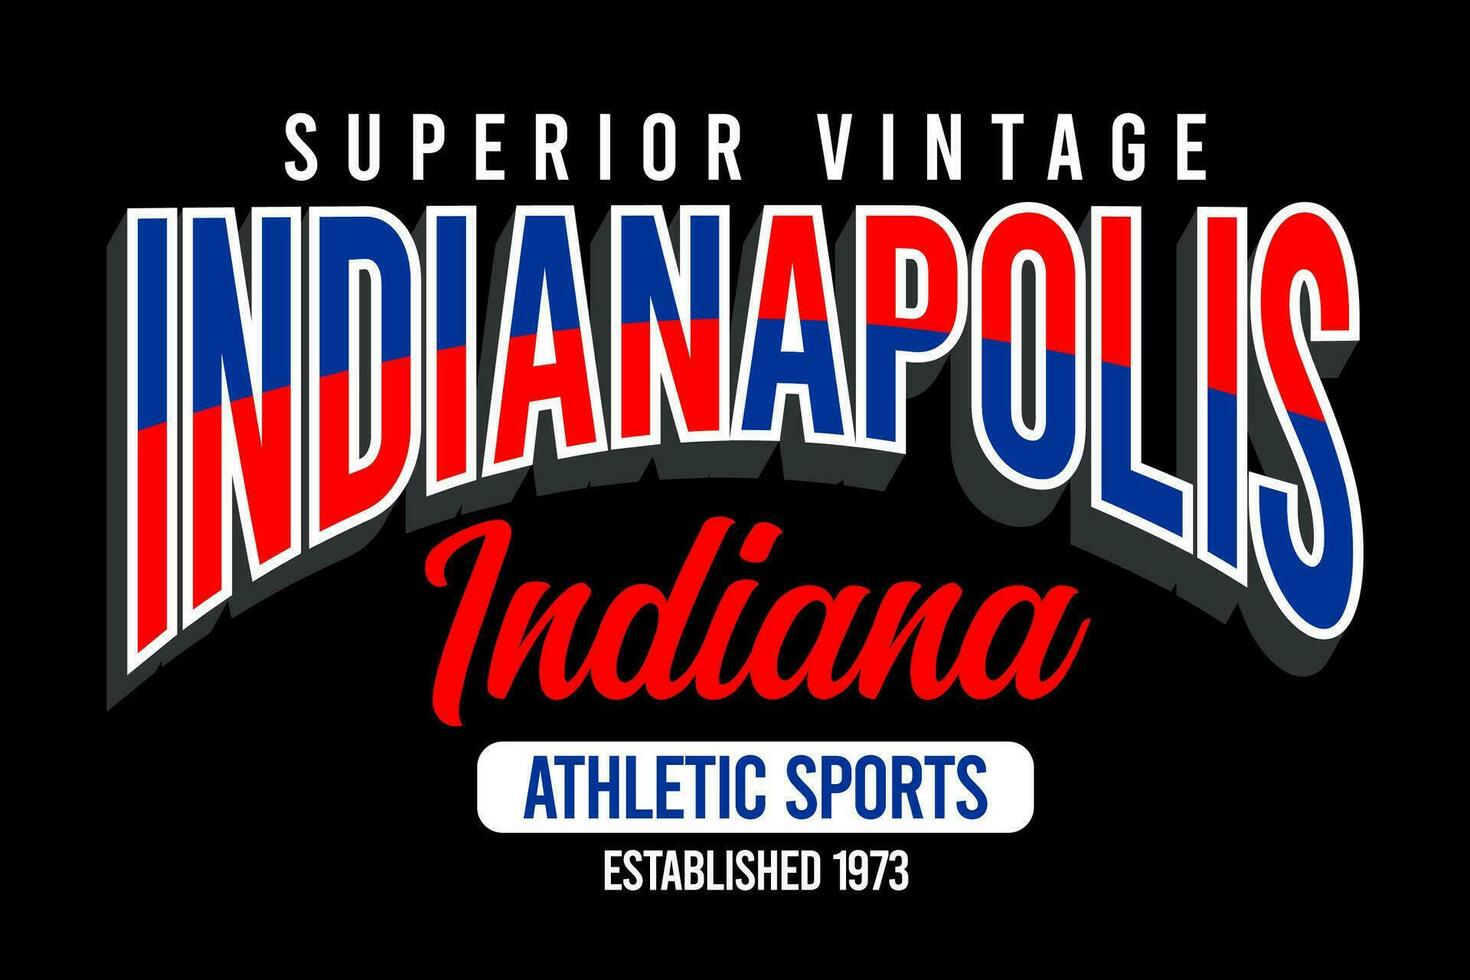 Indianapolis Indiana vintage college, for print on t shirts etc. vector